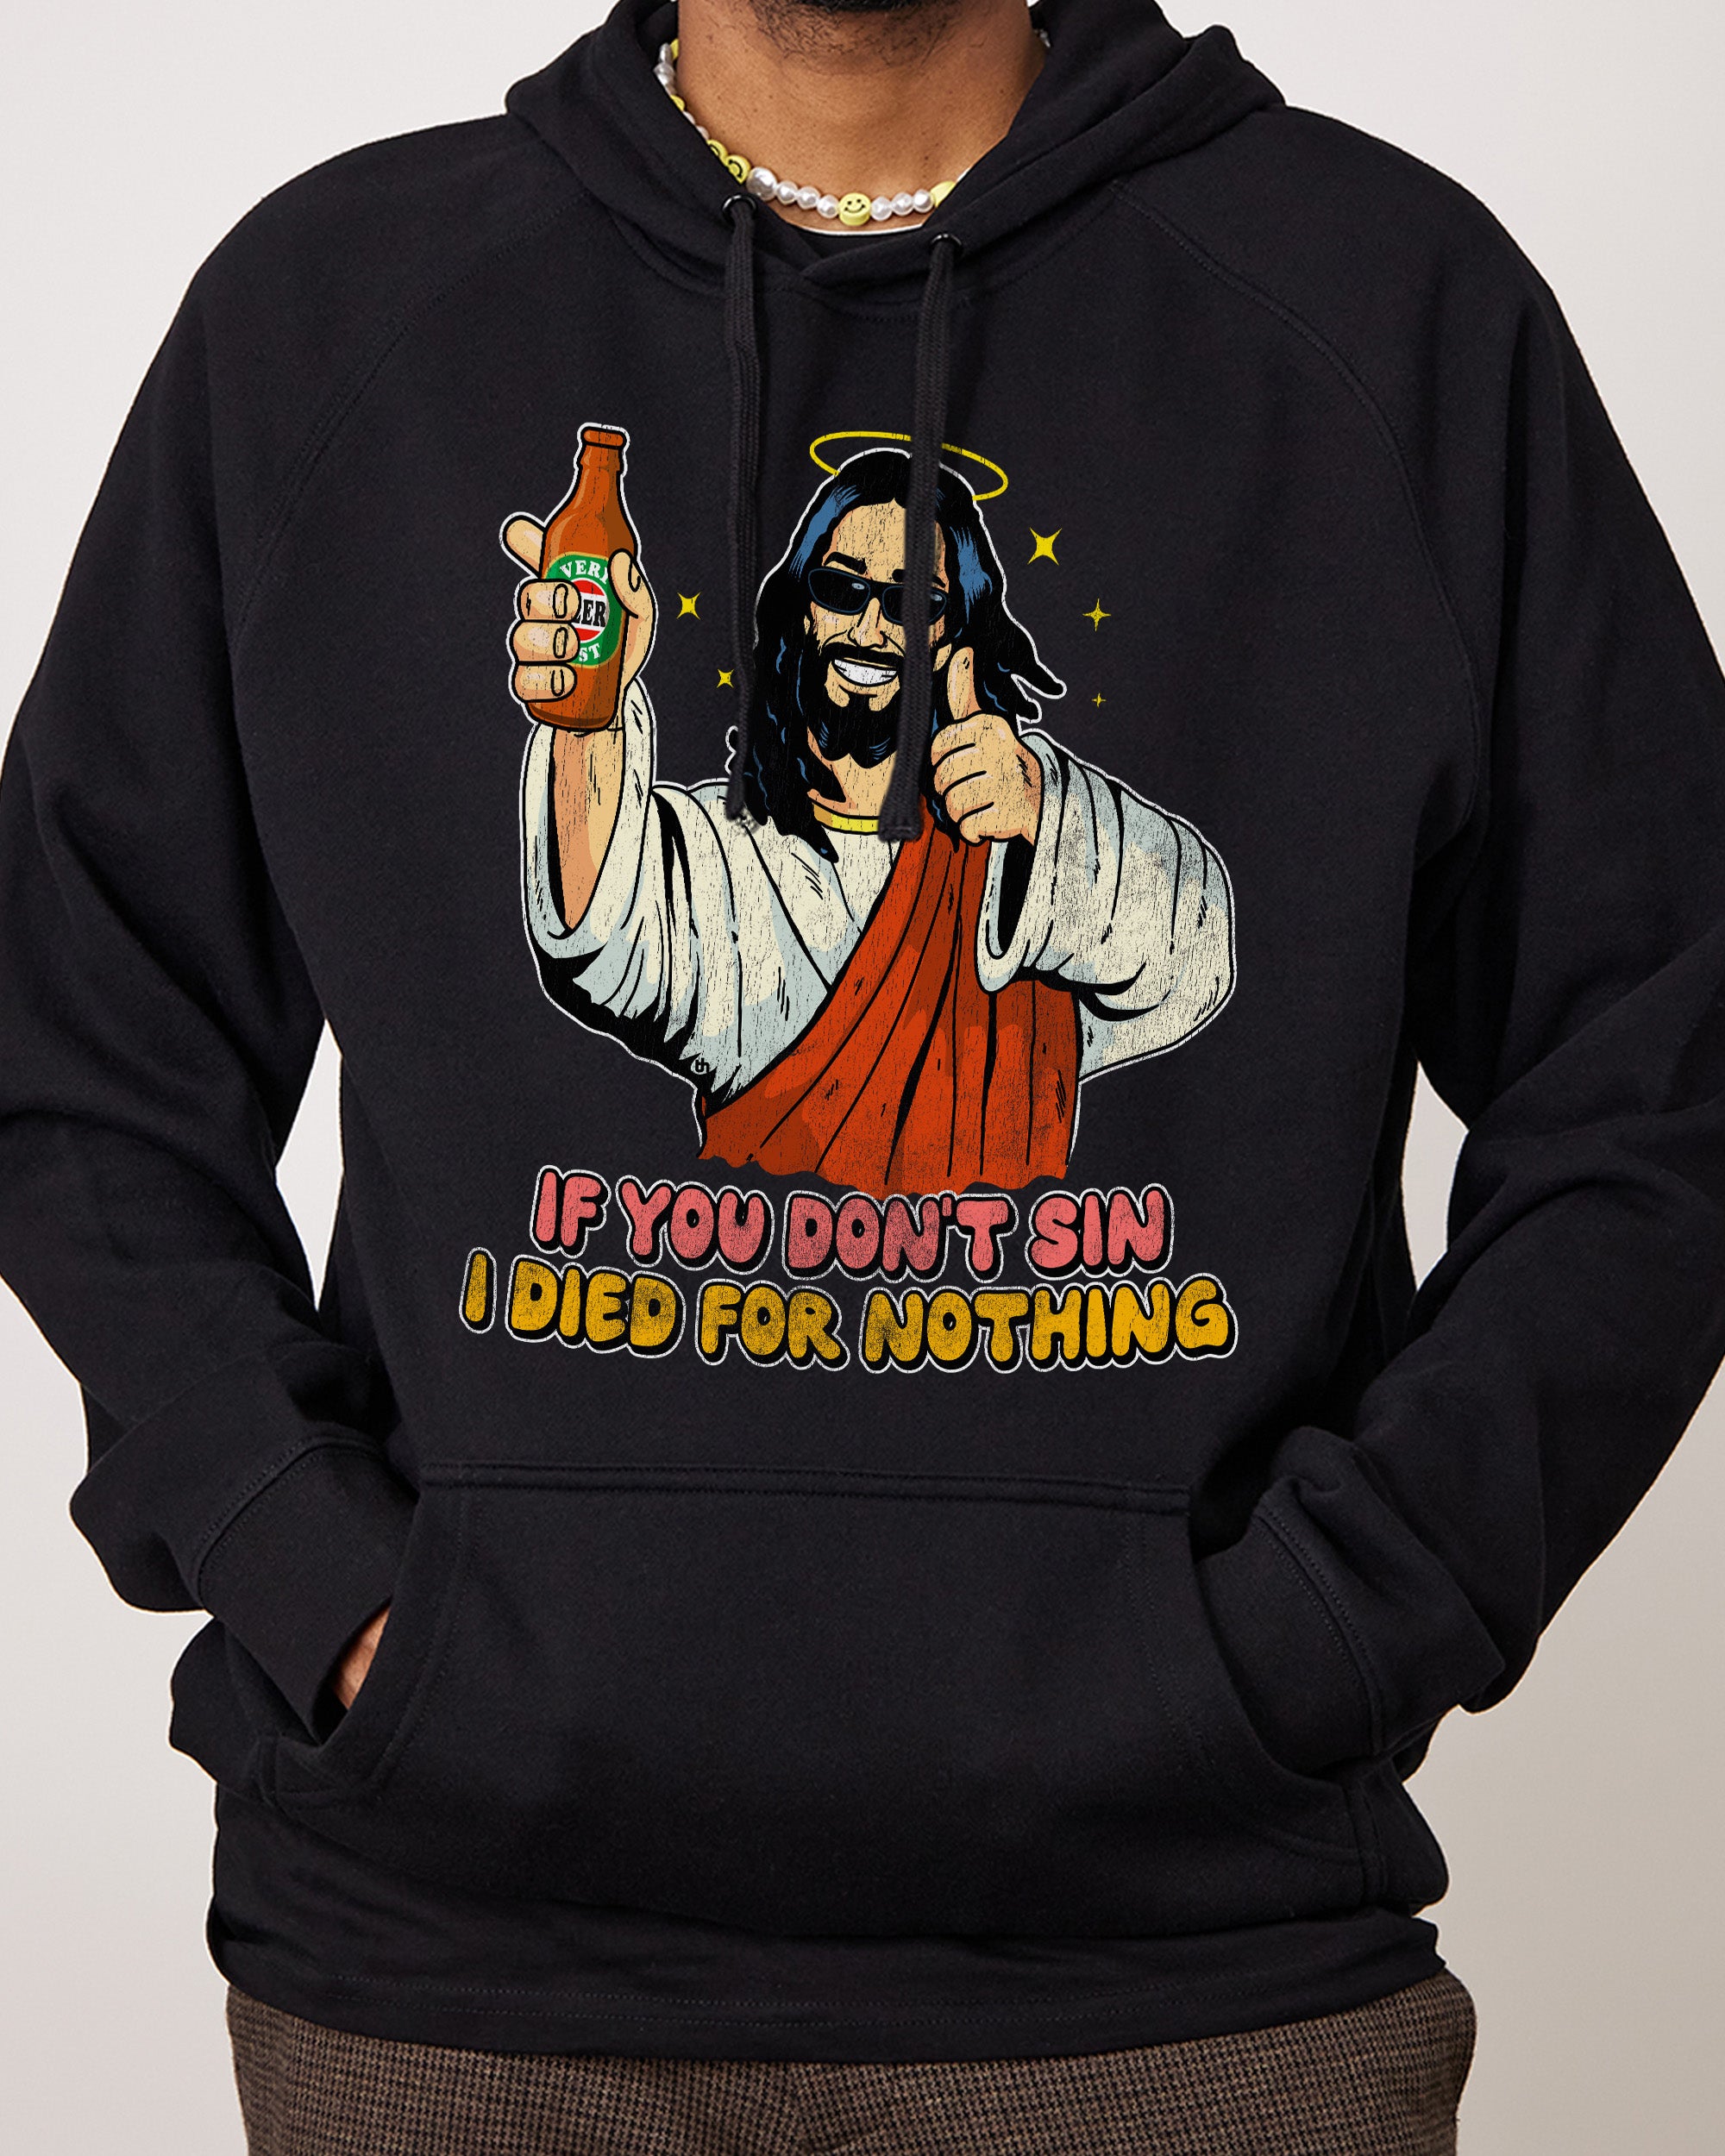 If You Don't Sin I Died for Nothing Hoodie